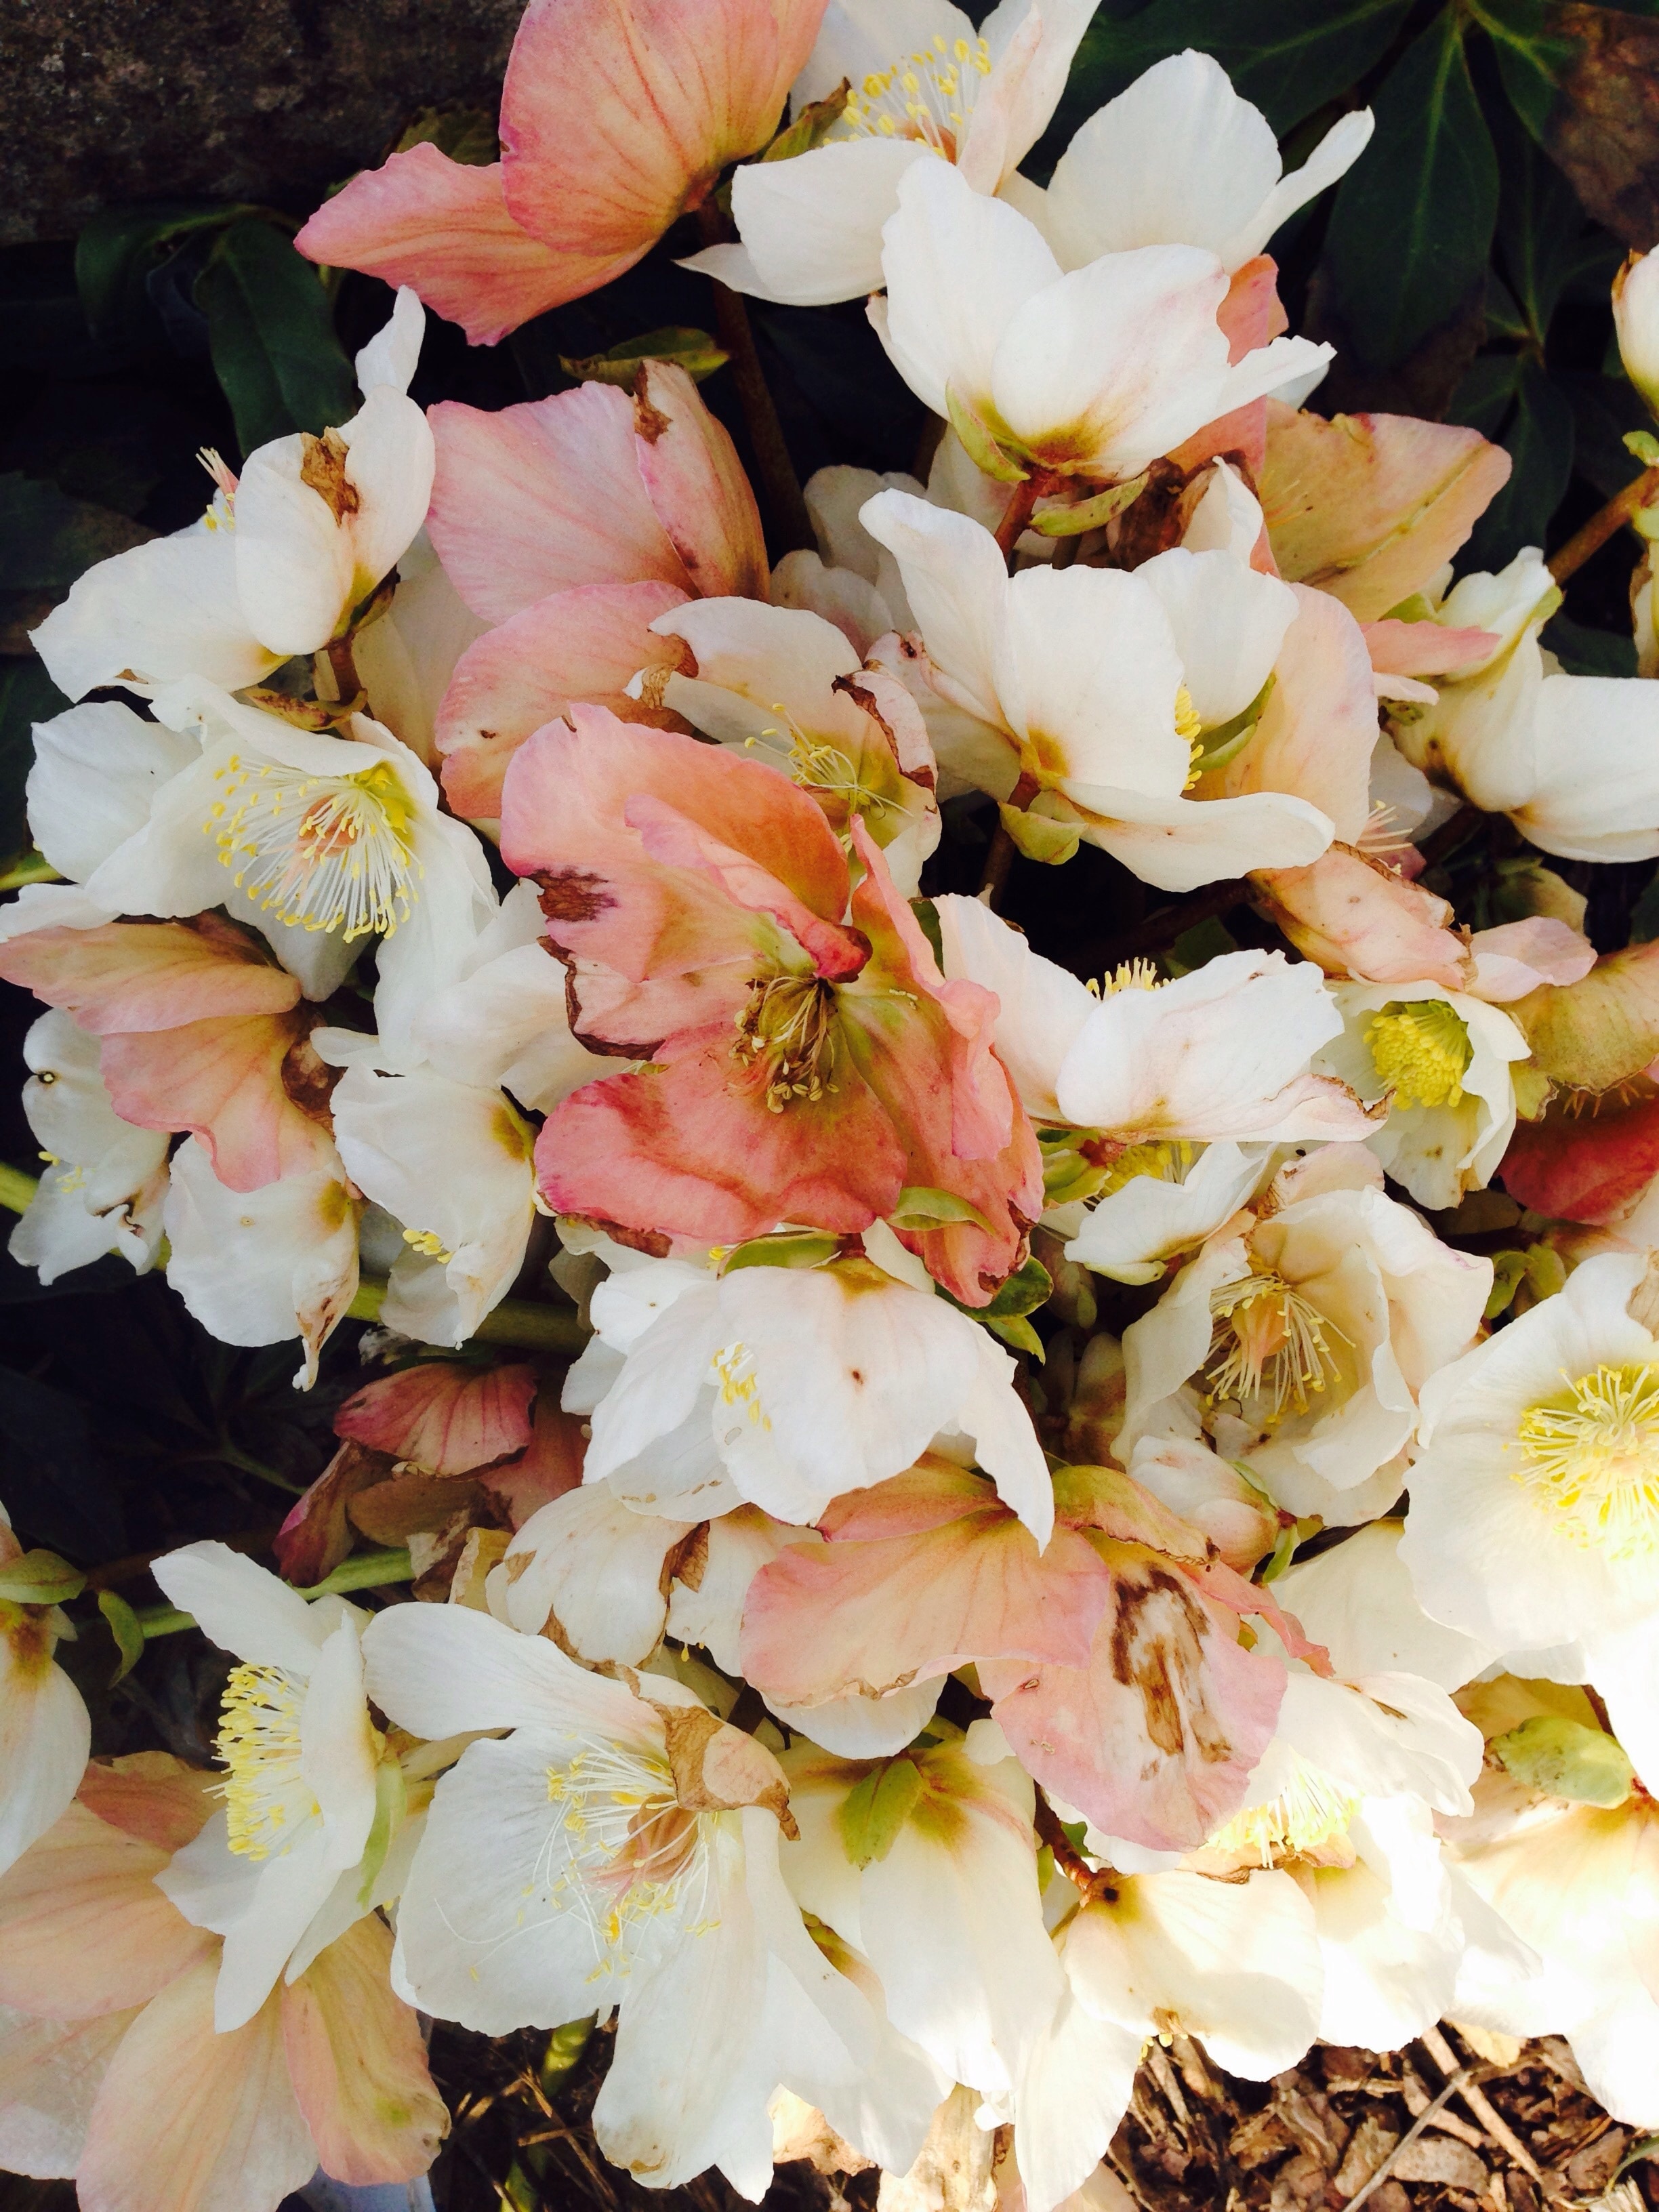 bouquet of white and pink petaled flowers